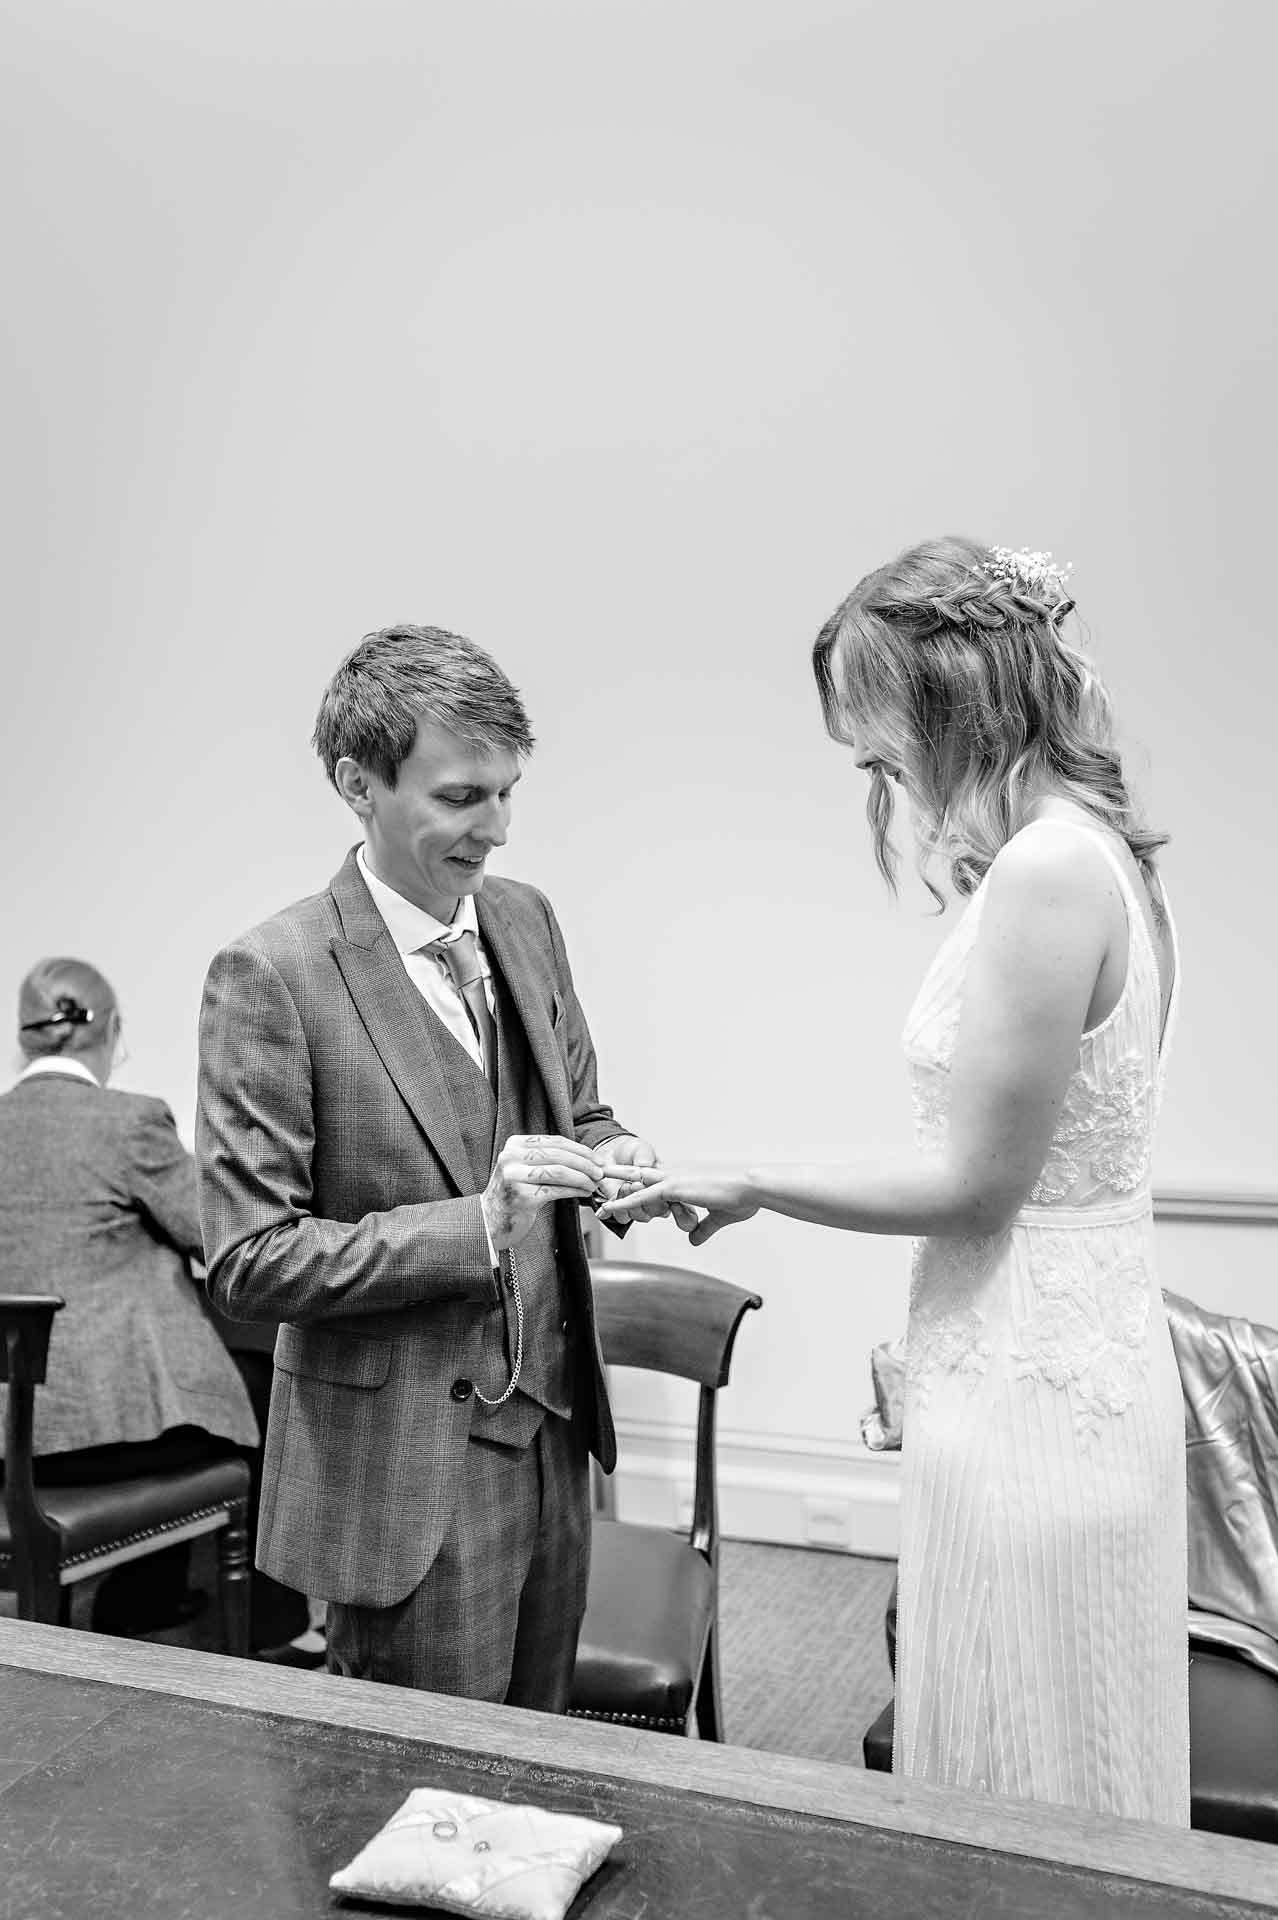 The groom places the rings on the bride's finger in the Statutory Room at the Old Council House in Bristol